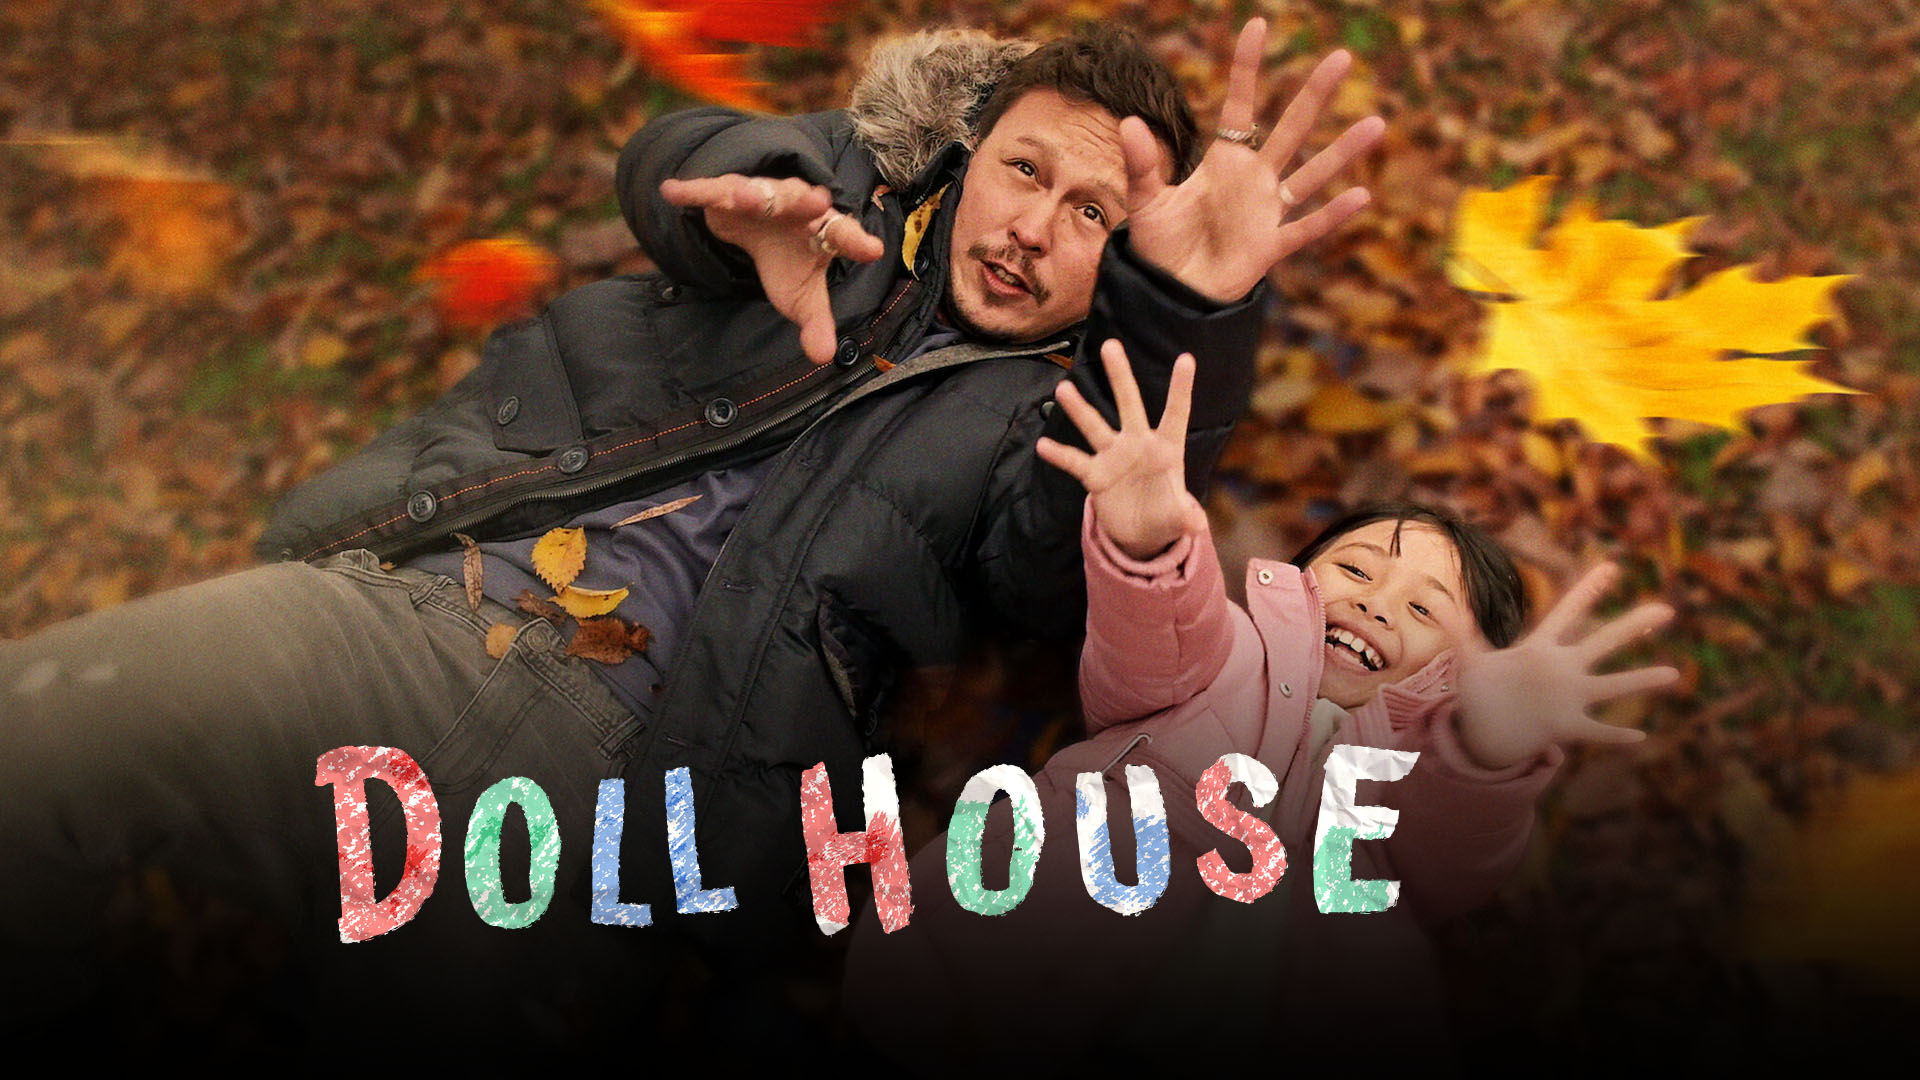 Doll House Release Date, Cast, Plot, and More!